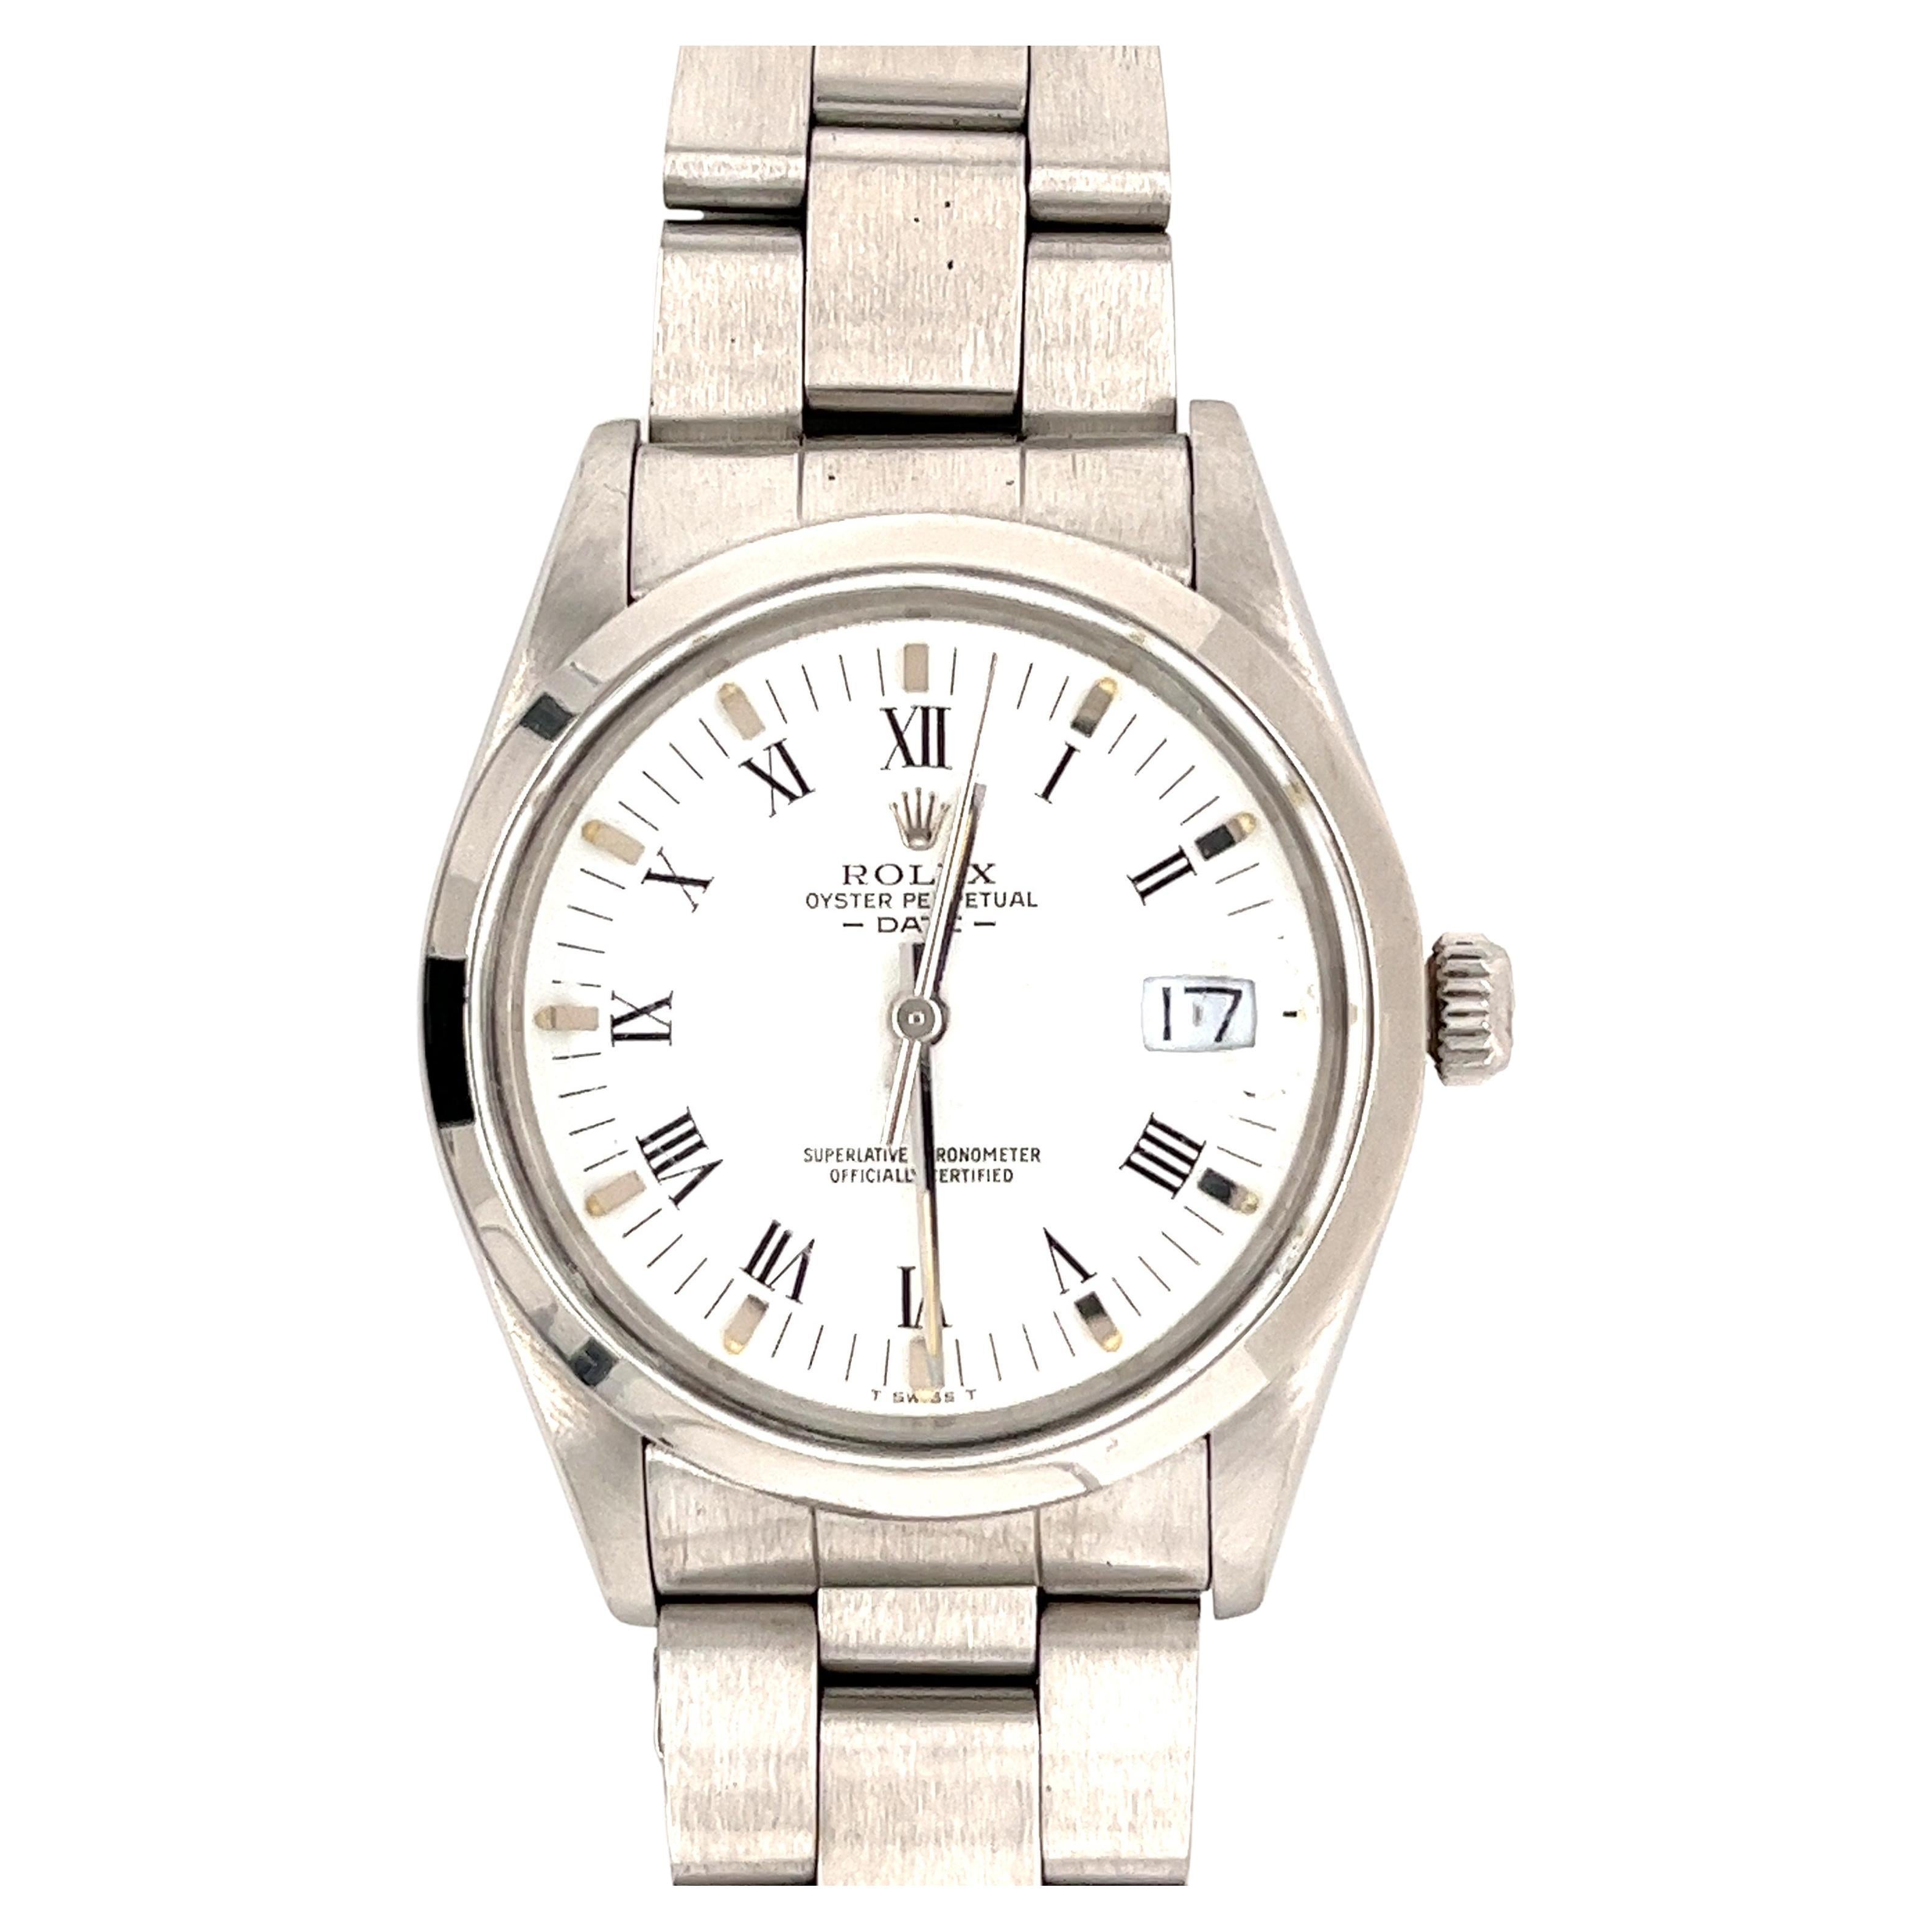 Rolex Oyster Date Ref. 15200 White Dial Roman Numerals in Oyster Stainless Steel